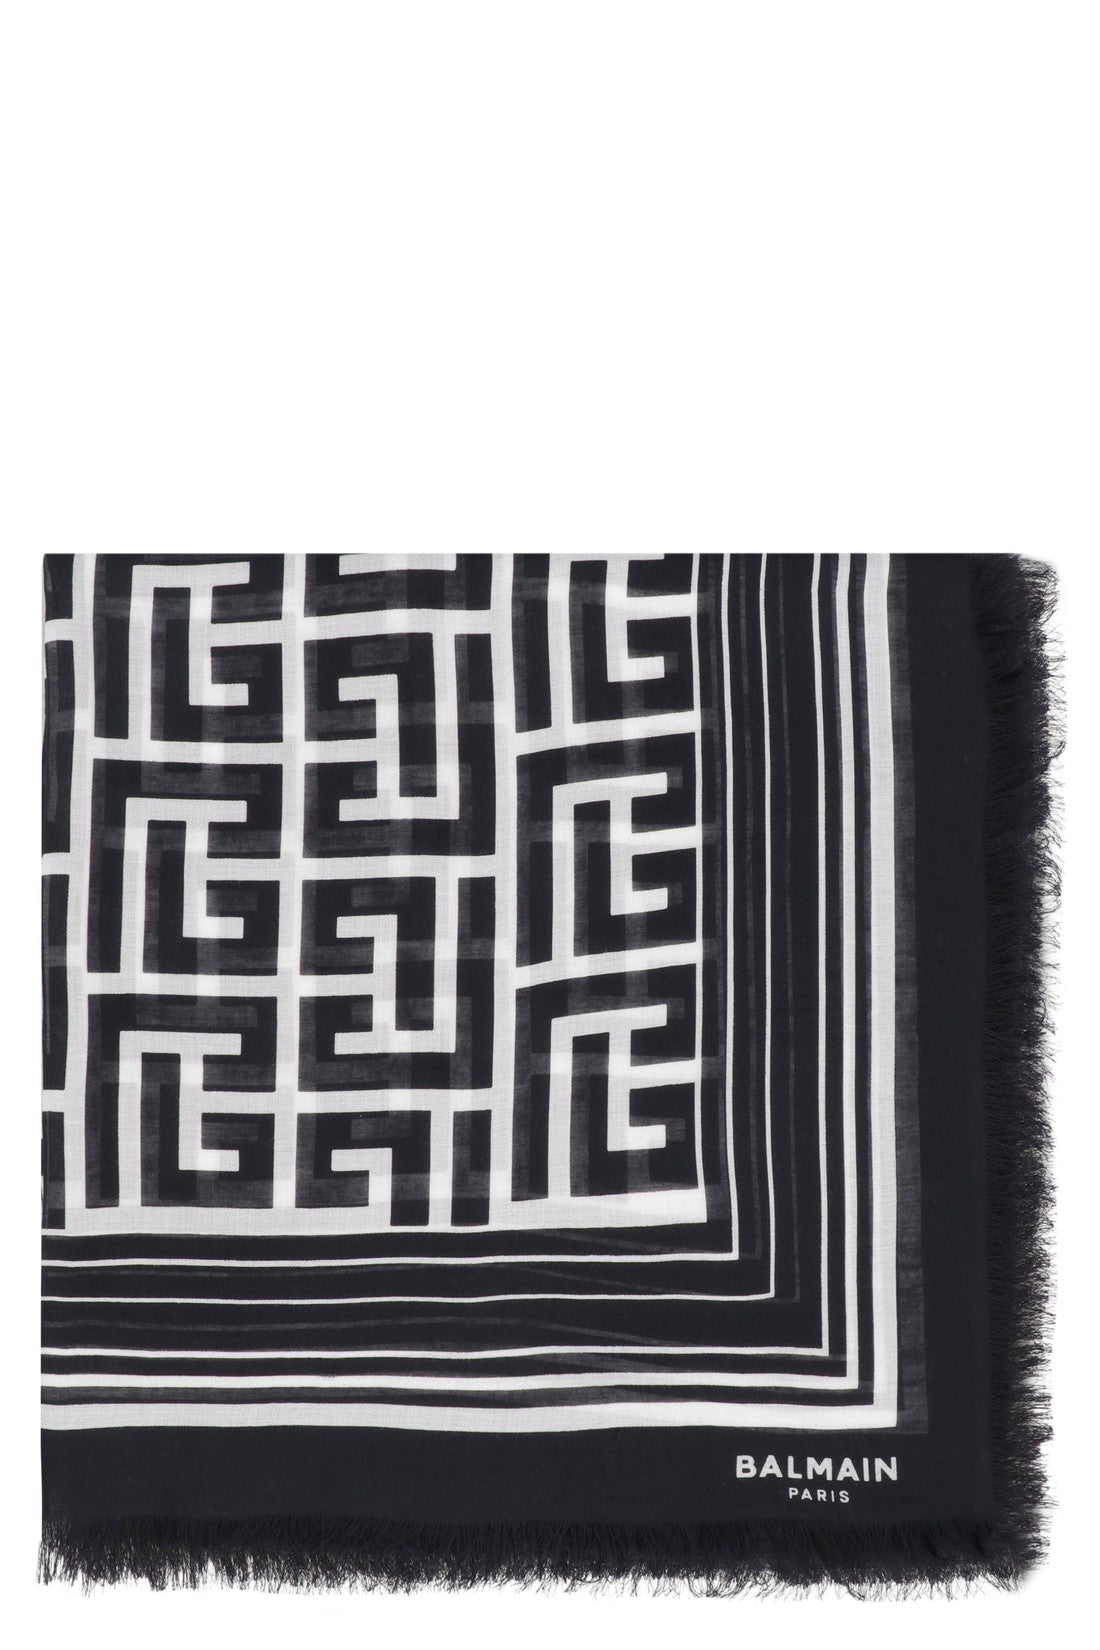 Balmain-OUTLET-SALE-Jacquard shawl with frayed edges-ARCHIVIST